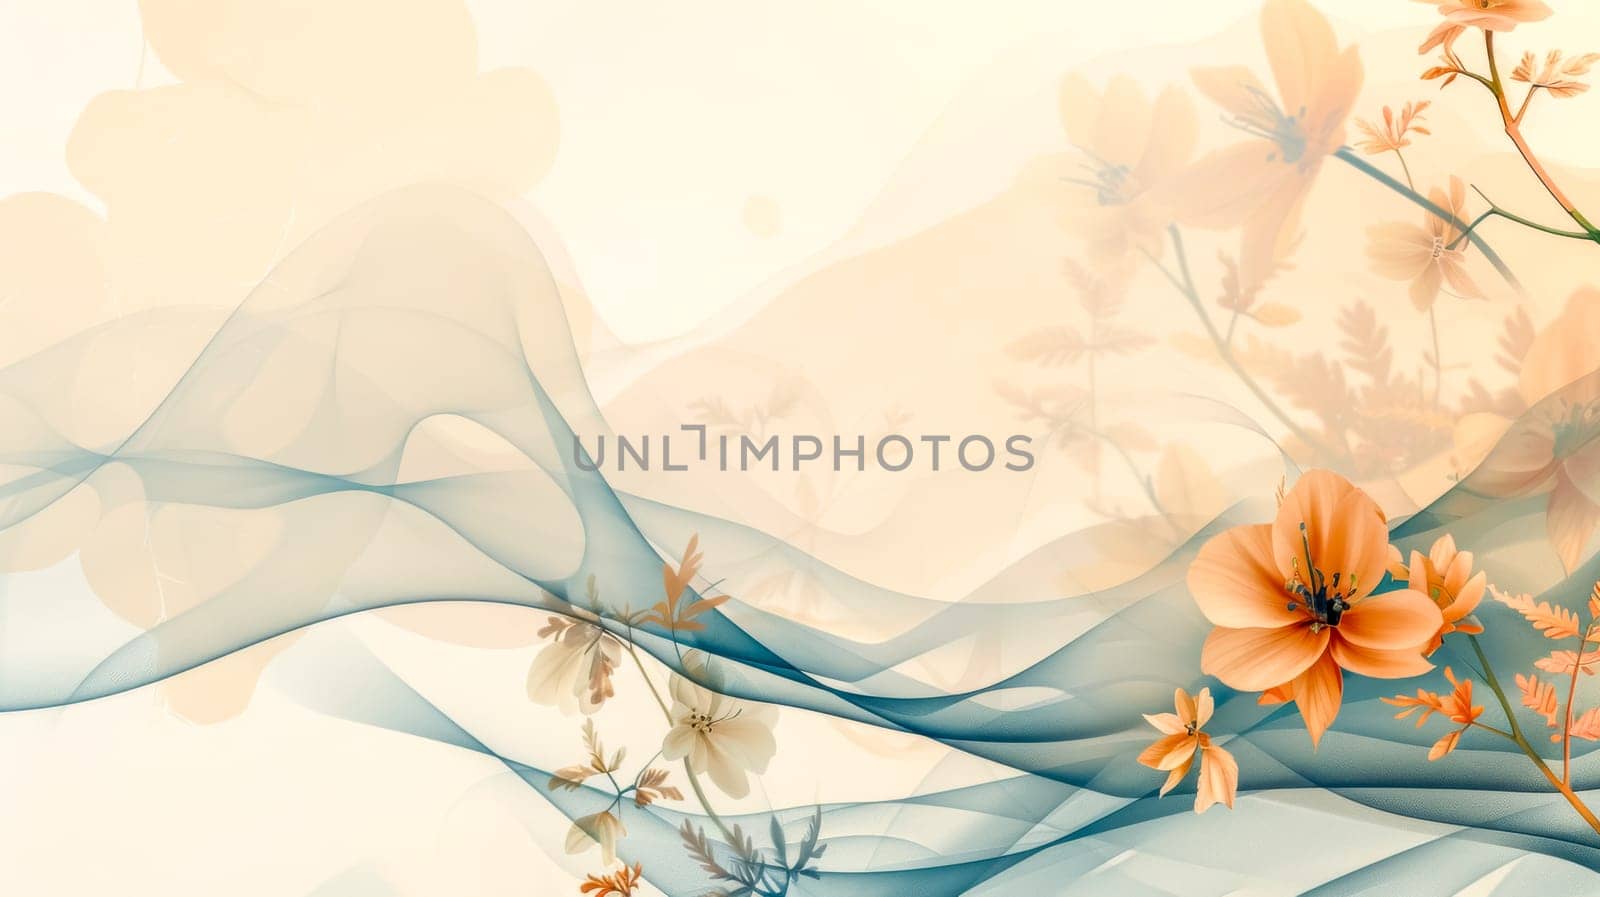 Abstract floral design with orange blossoms and waves by Edophoto